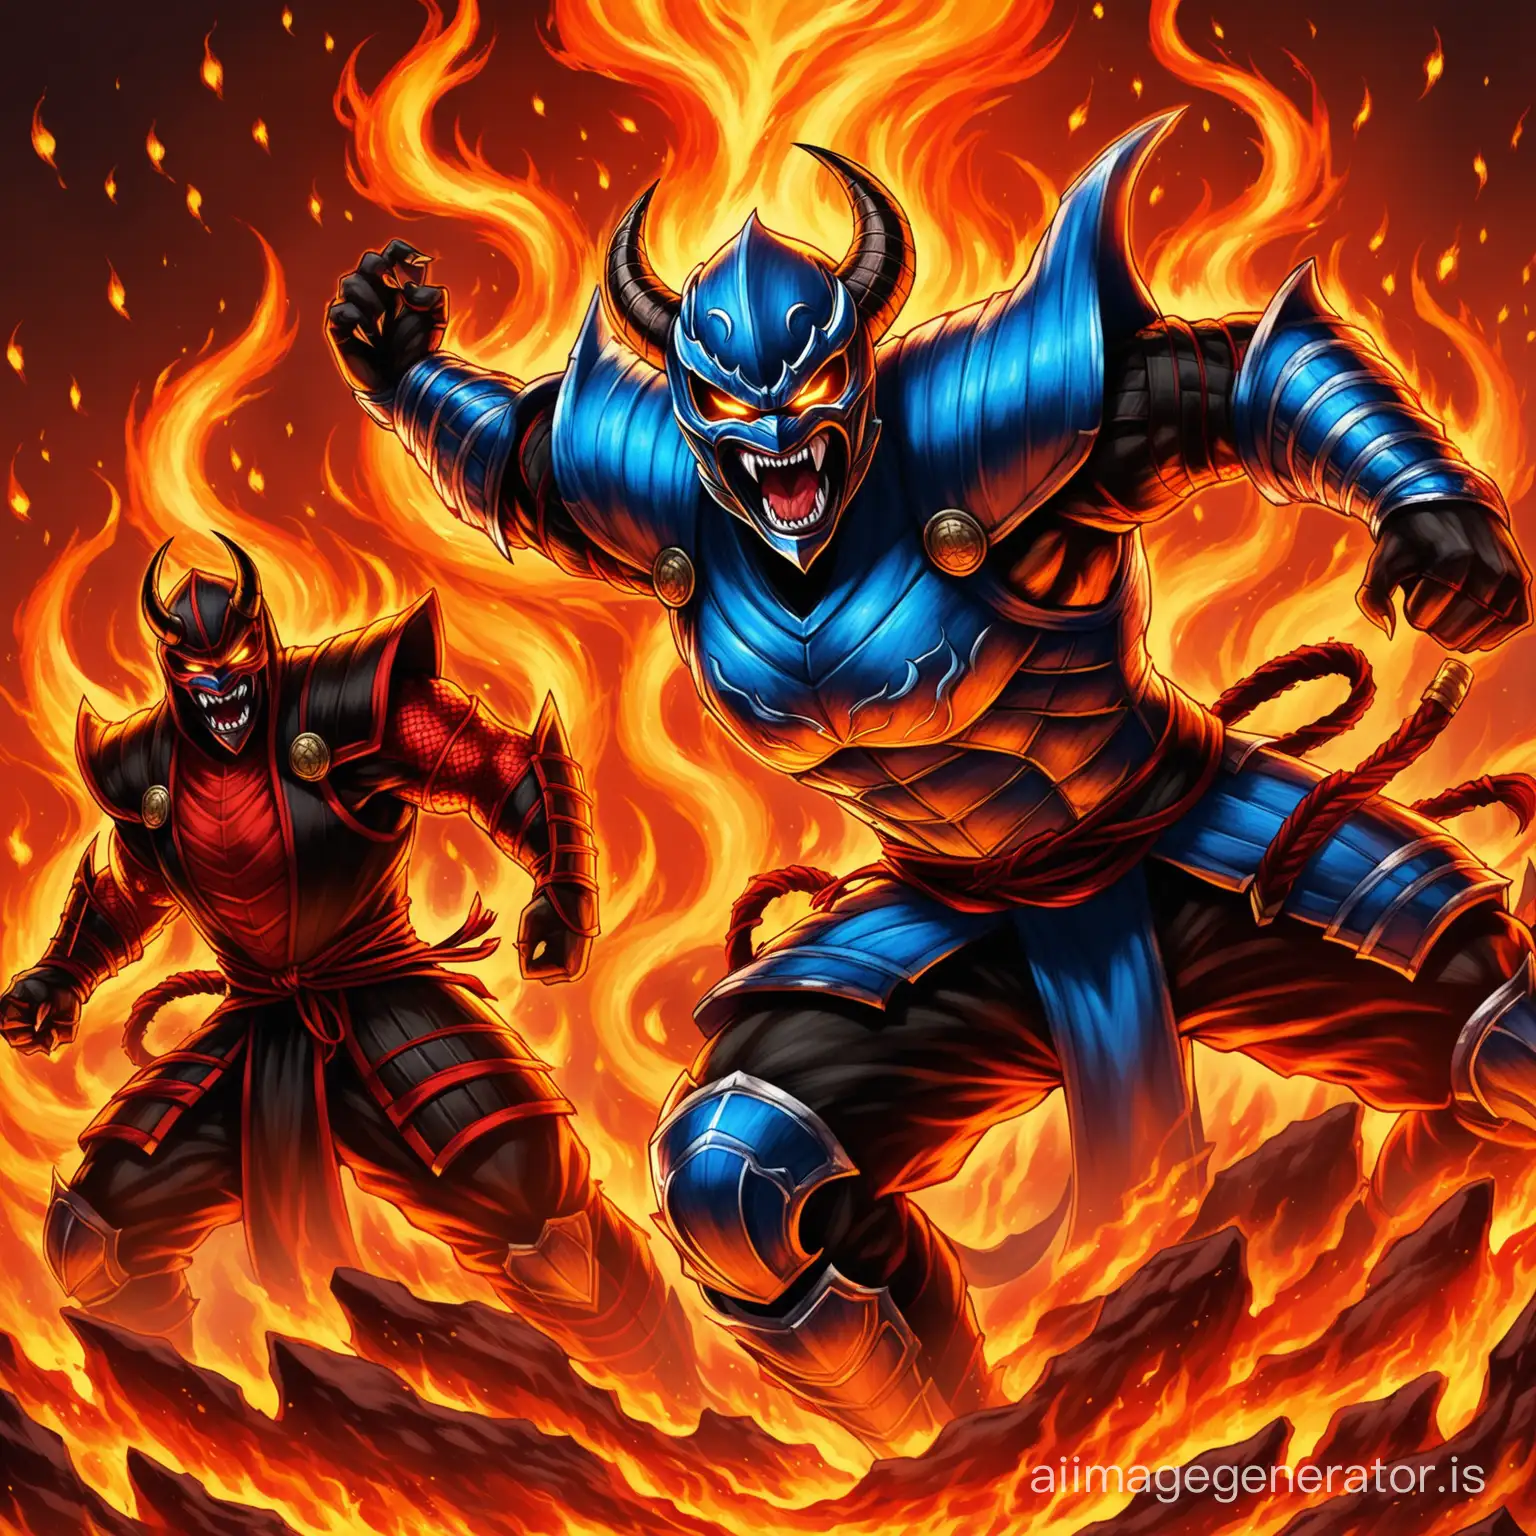 Fiery-DemonNinja-SubZero-Engulfed-in-Flames-with-Chitinous-Armor